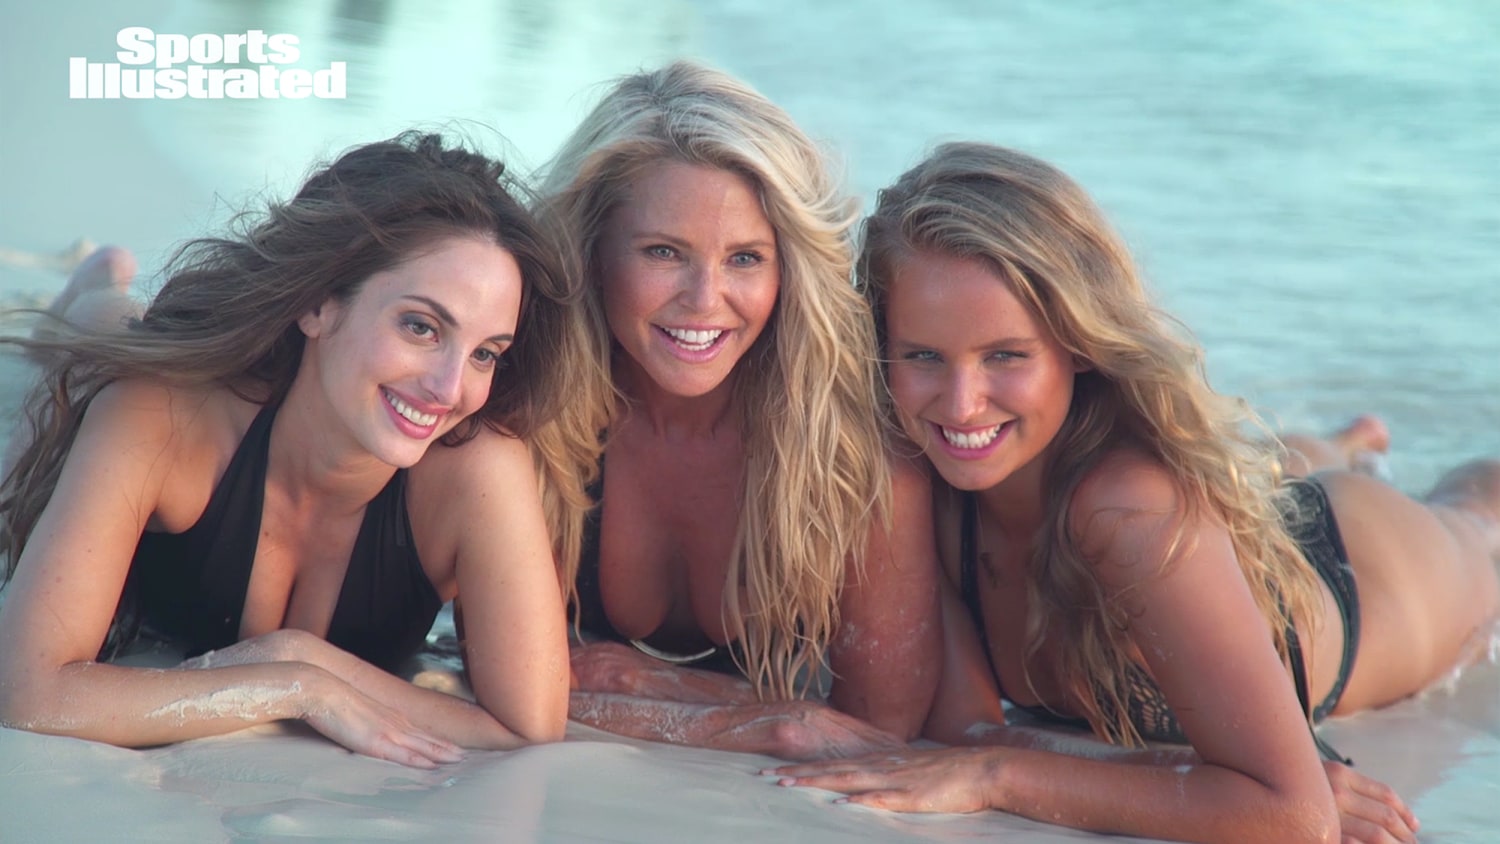 Christie Brinkley and Her Daughters Pose for Sports Illustrated